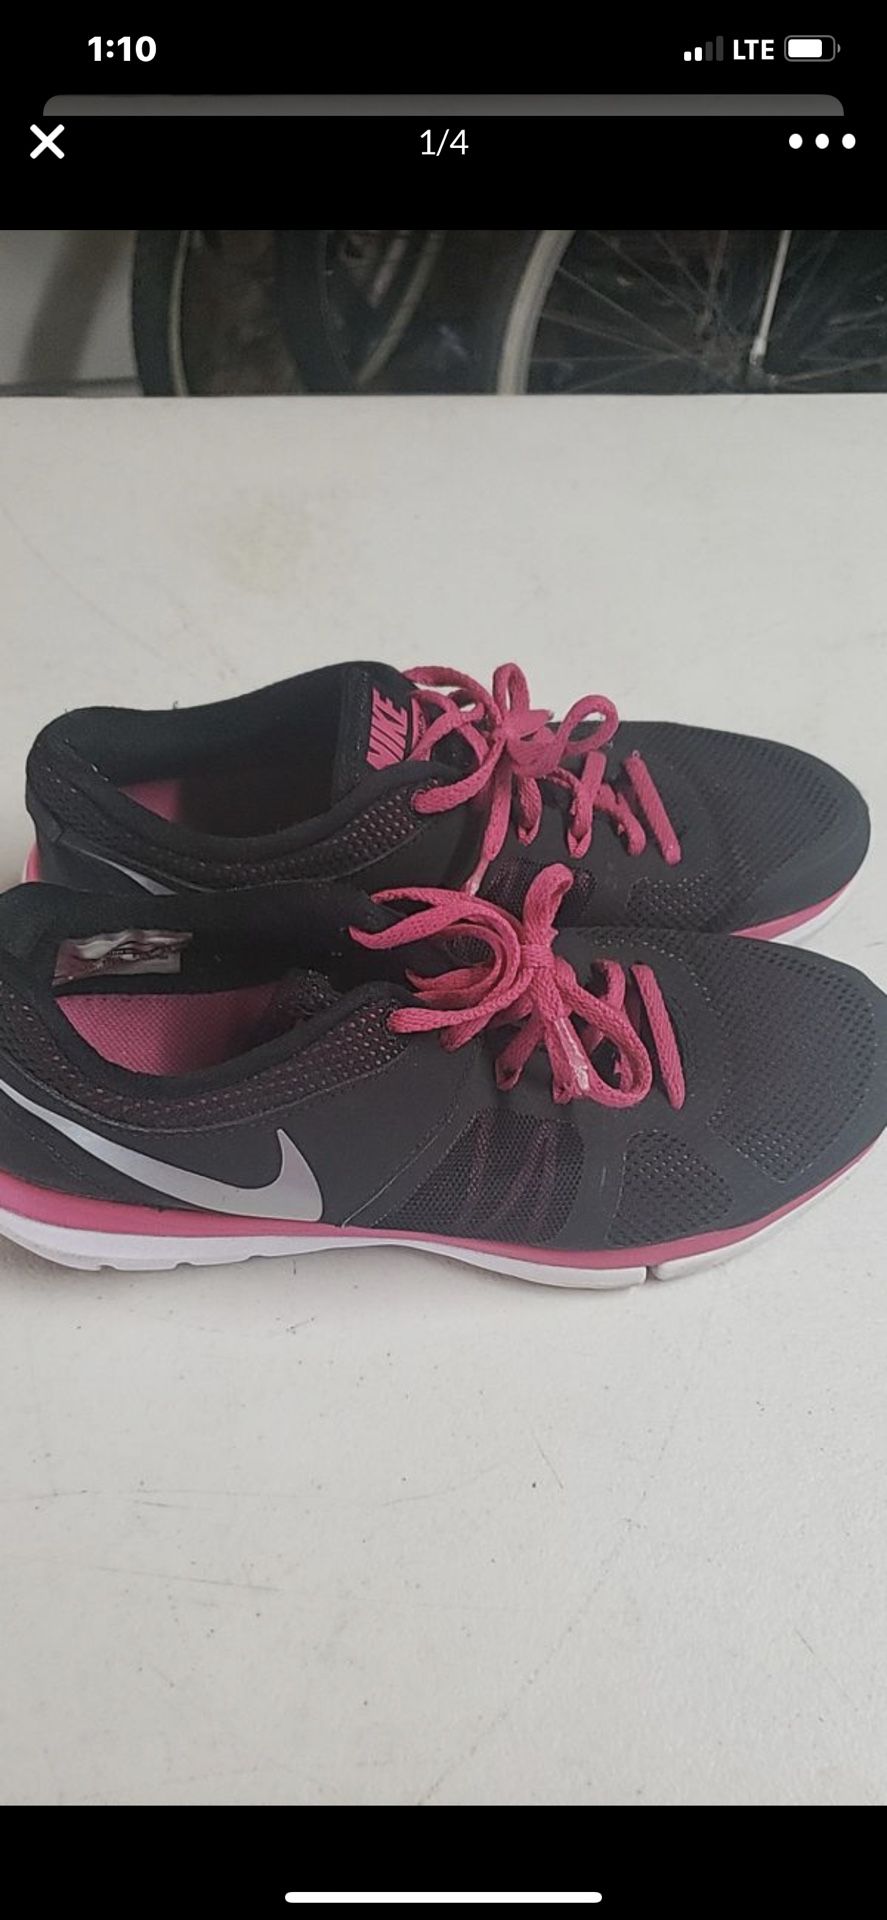 Black and pink women’s Nike shoes size 10